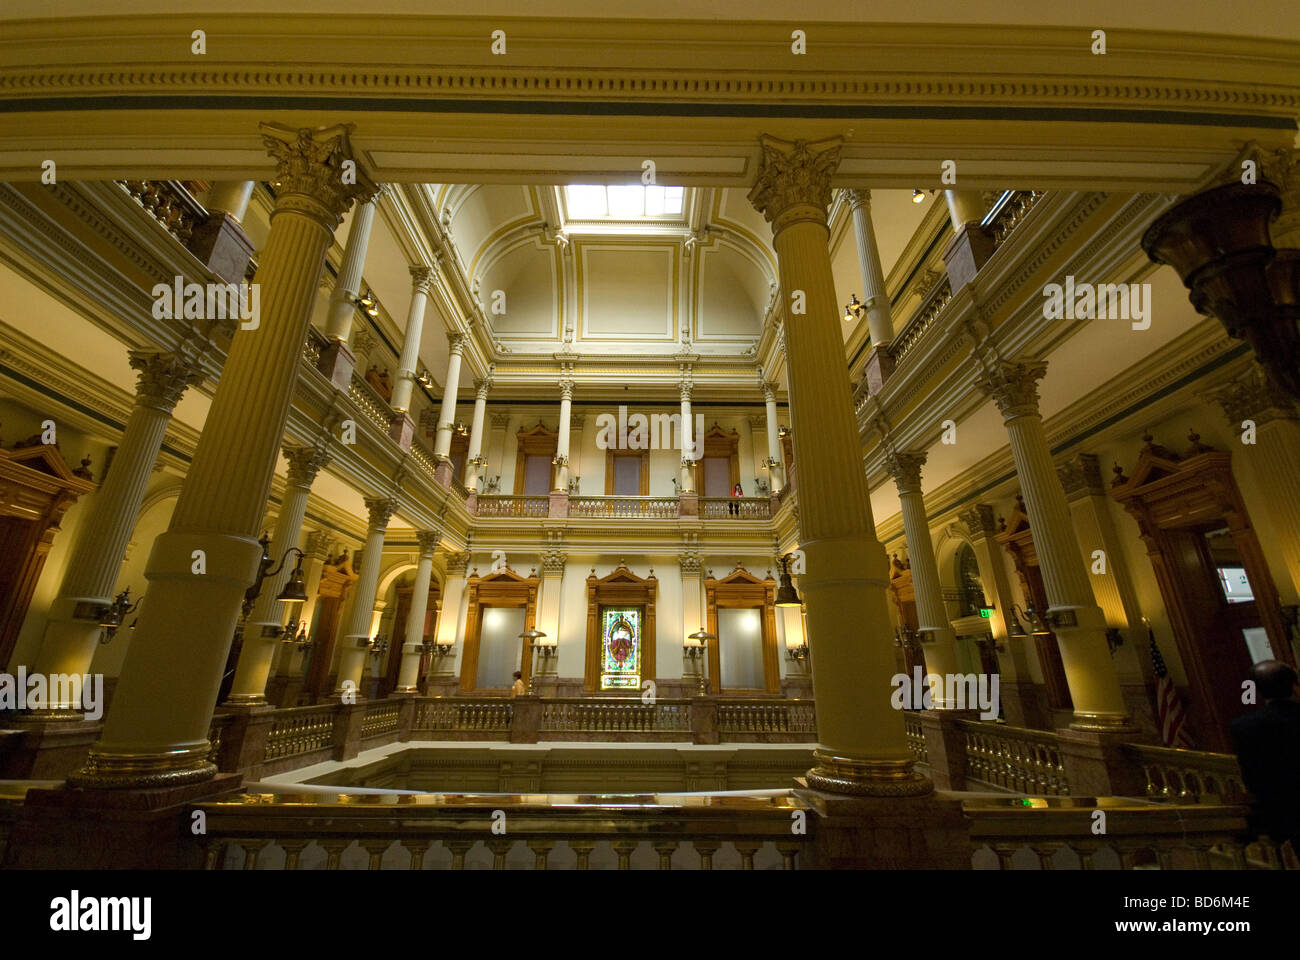 The beautiful interior of the State Capital building in Denver Stock Photo